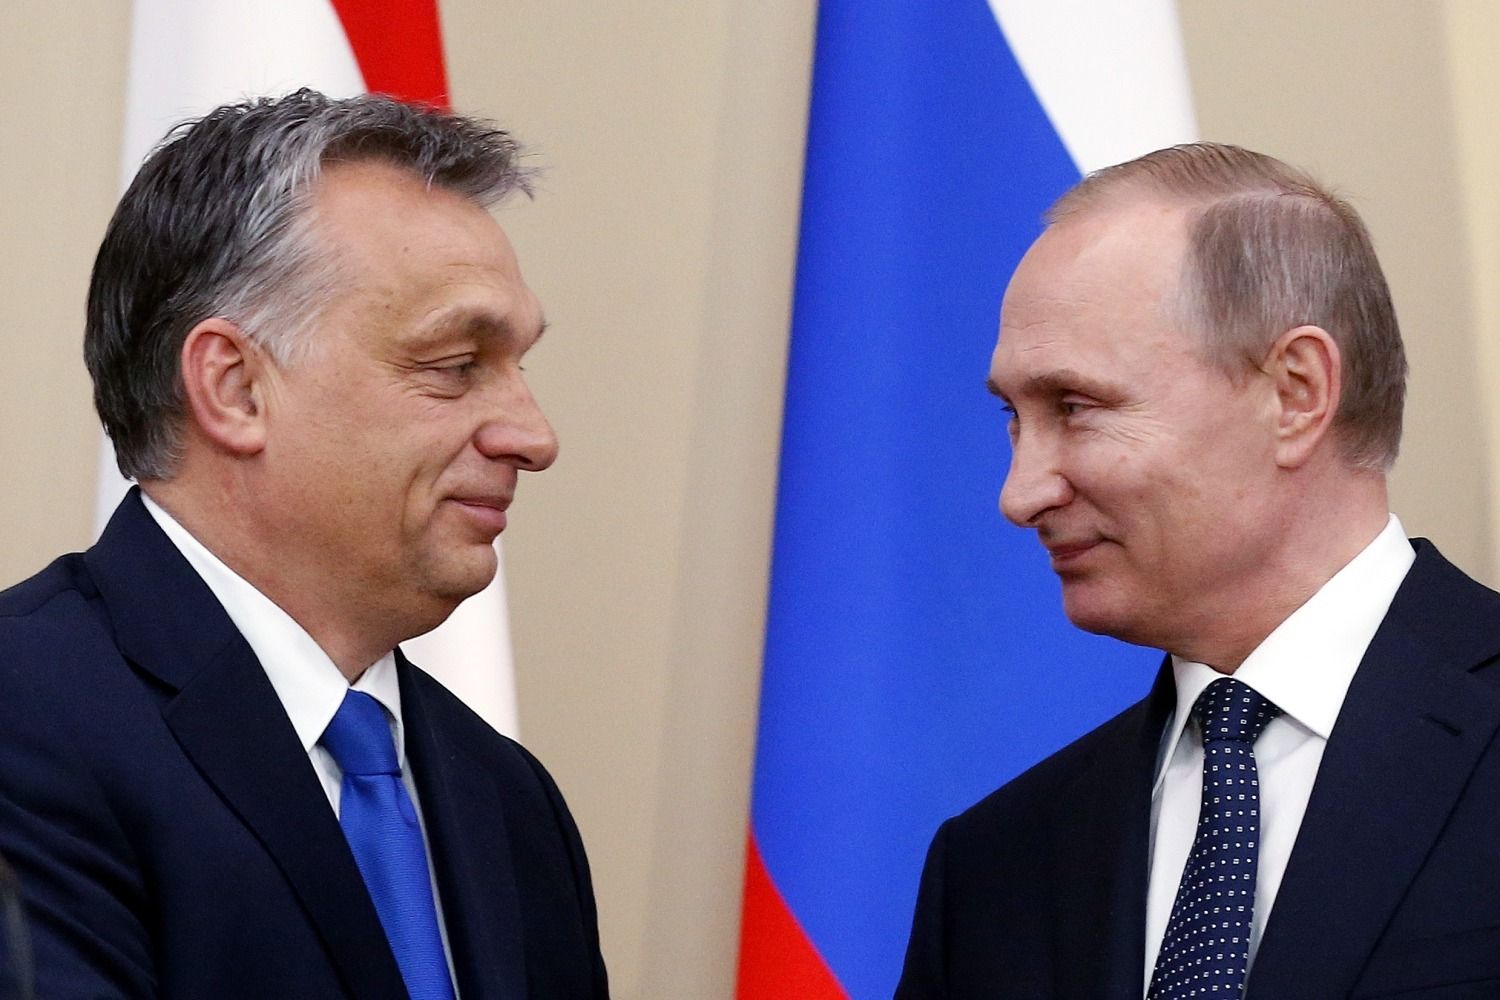 Hungary will hold a national consultation on EU sanctions against Russia - en